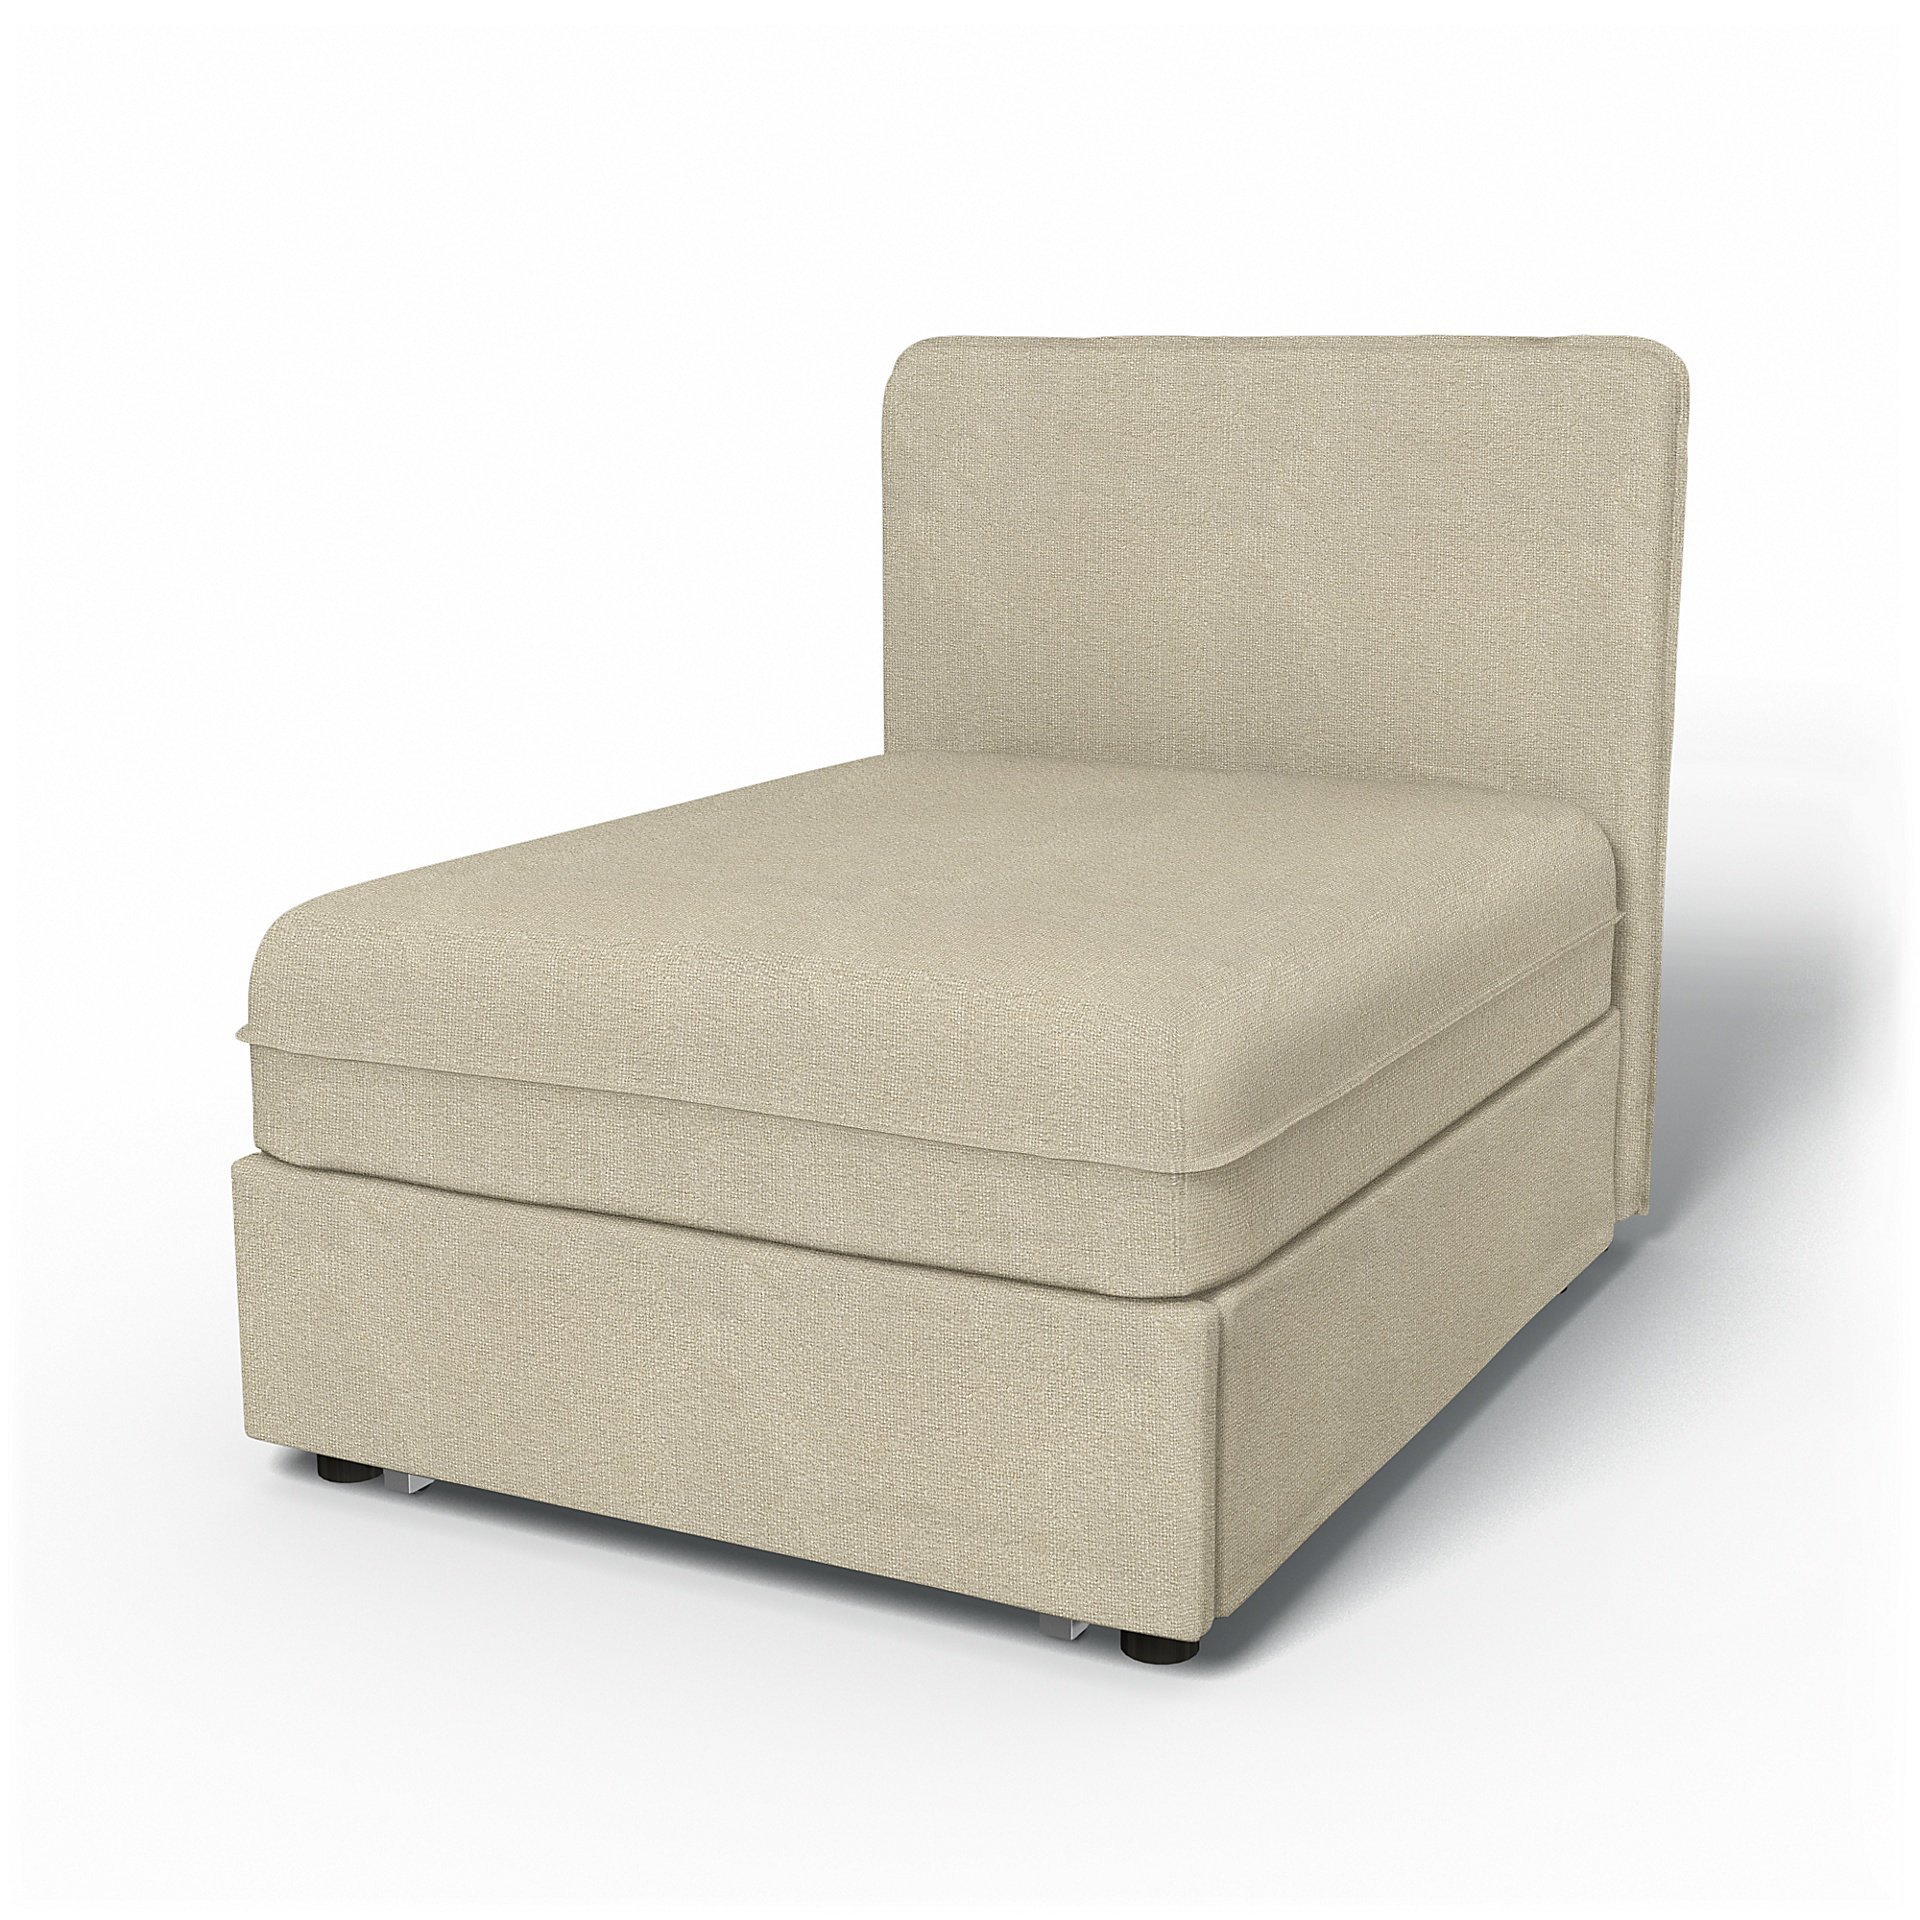 IKEA - Vallentuna Seat Module with Low Back Sofa Bed Cover 80x100 cm 32x39in, Cream, Boucle & Textur